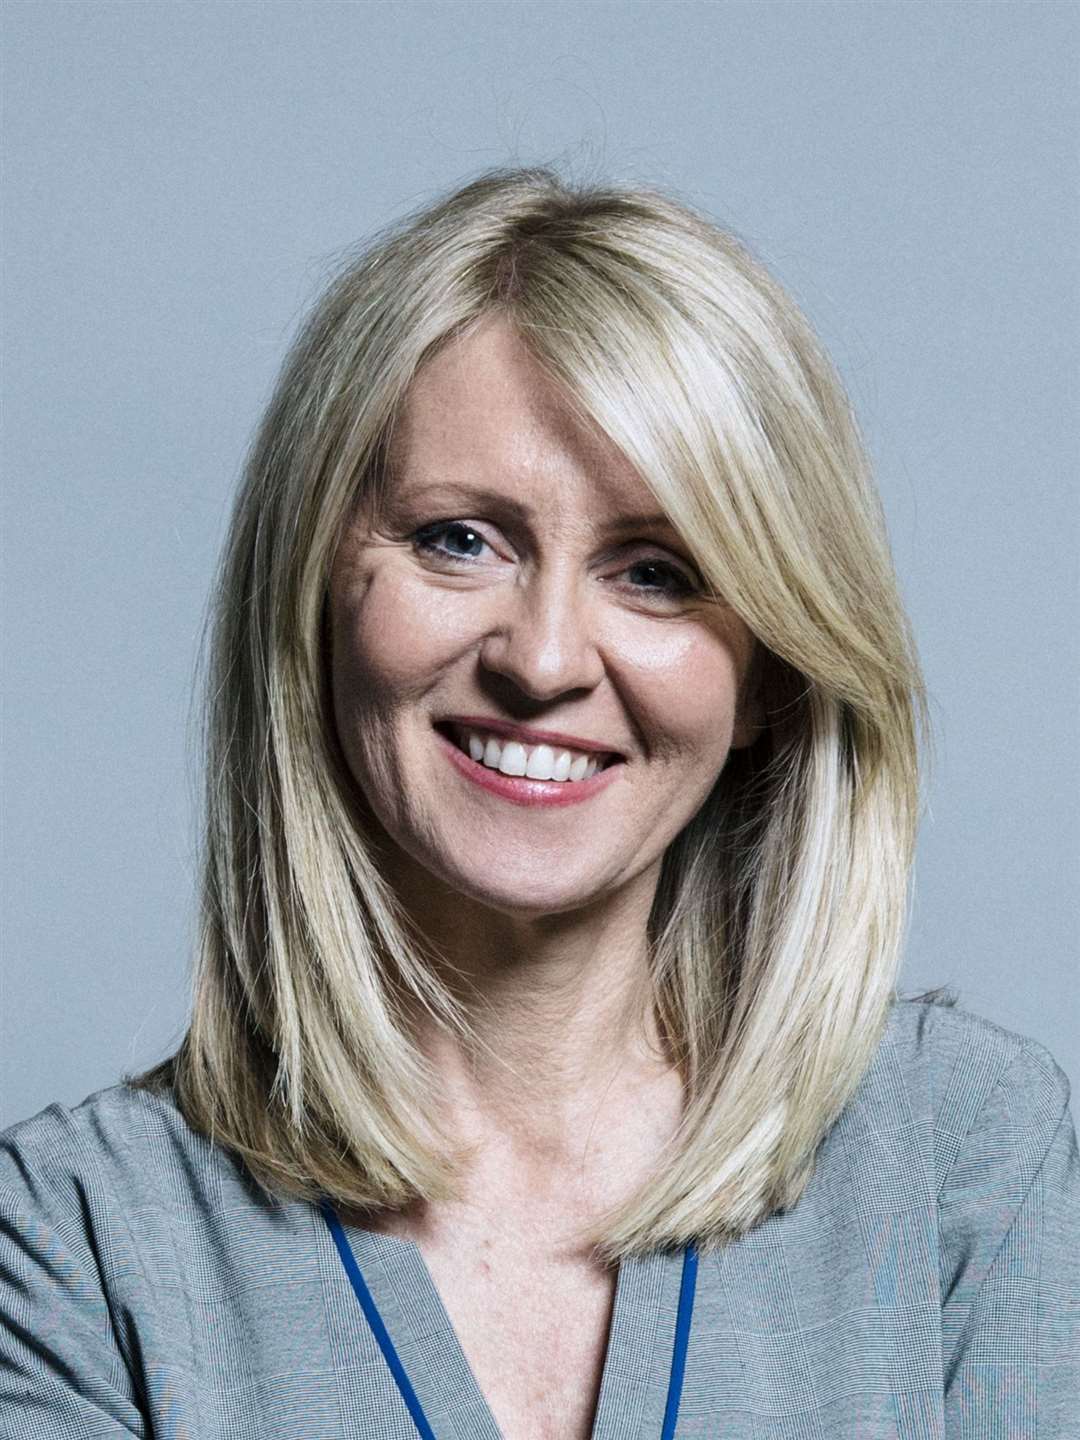 Esther McVey has backed the plans (19441955)